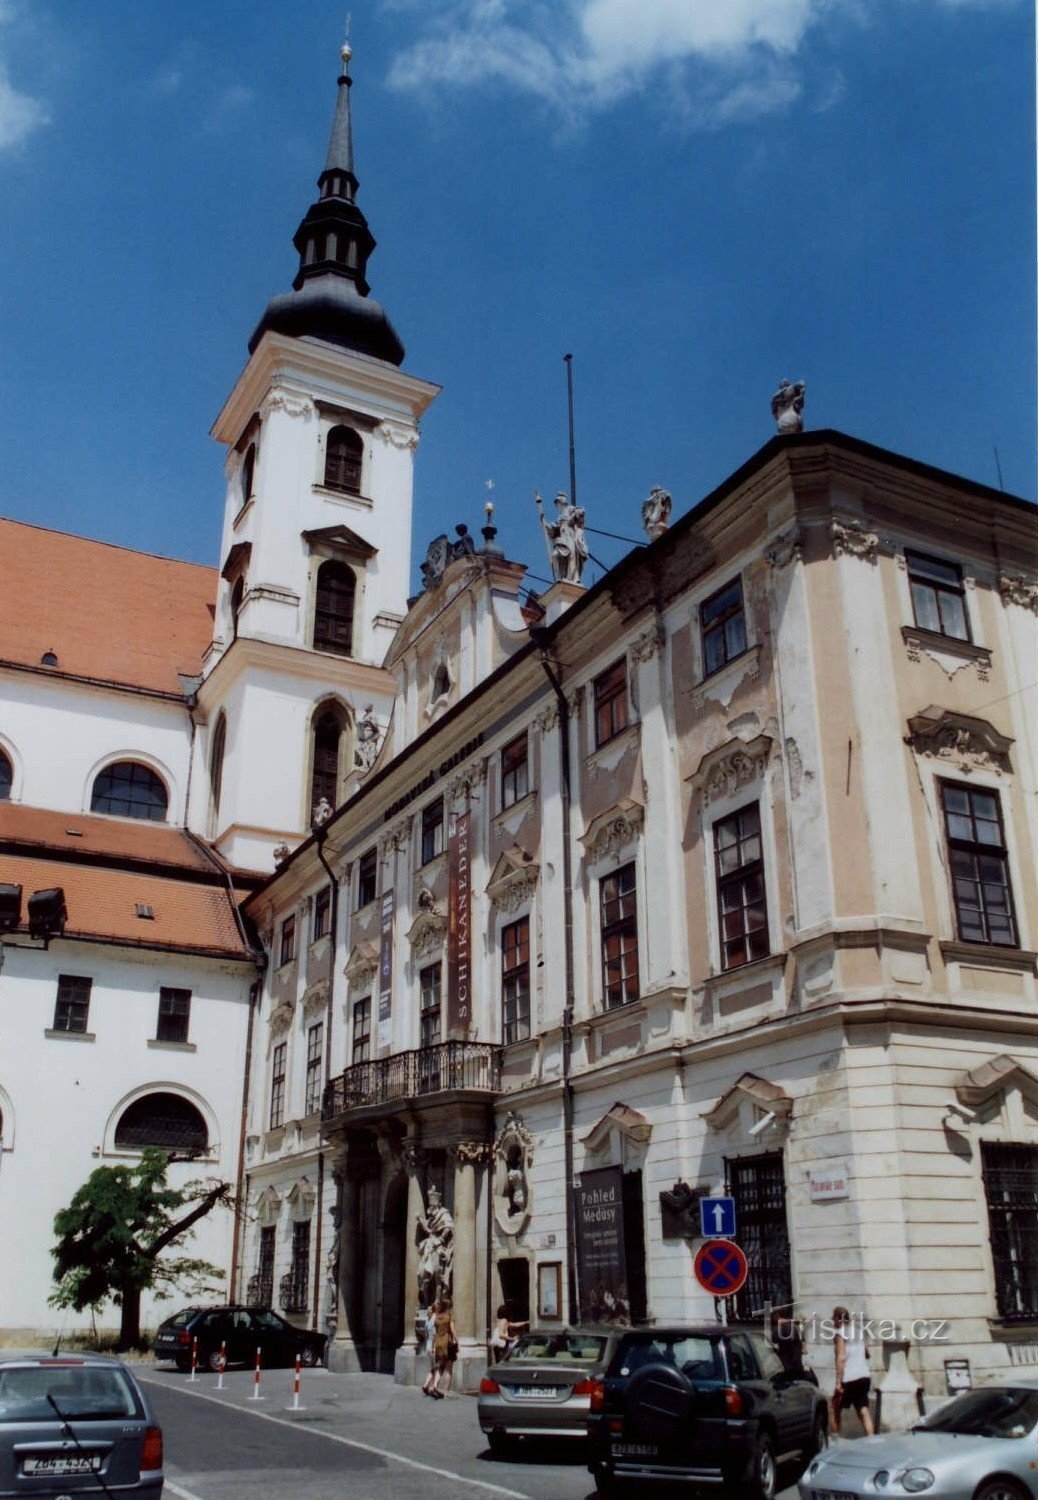 The governor's palace and the church of St. Tomas